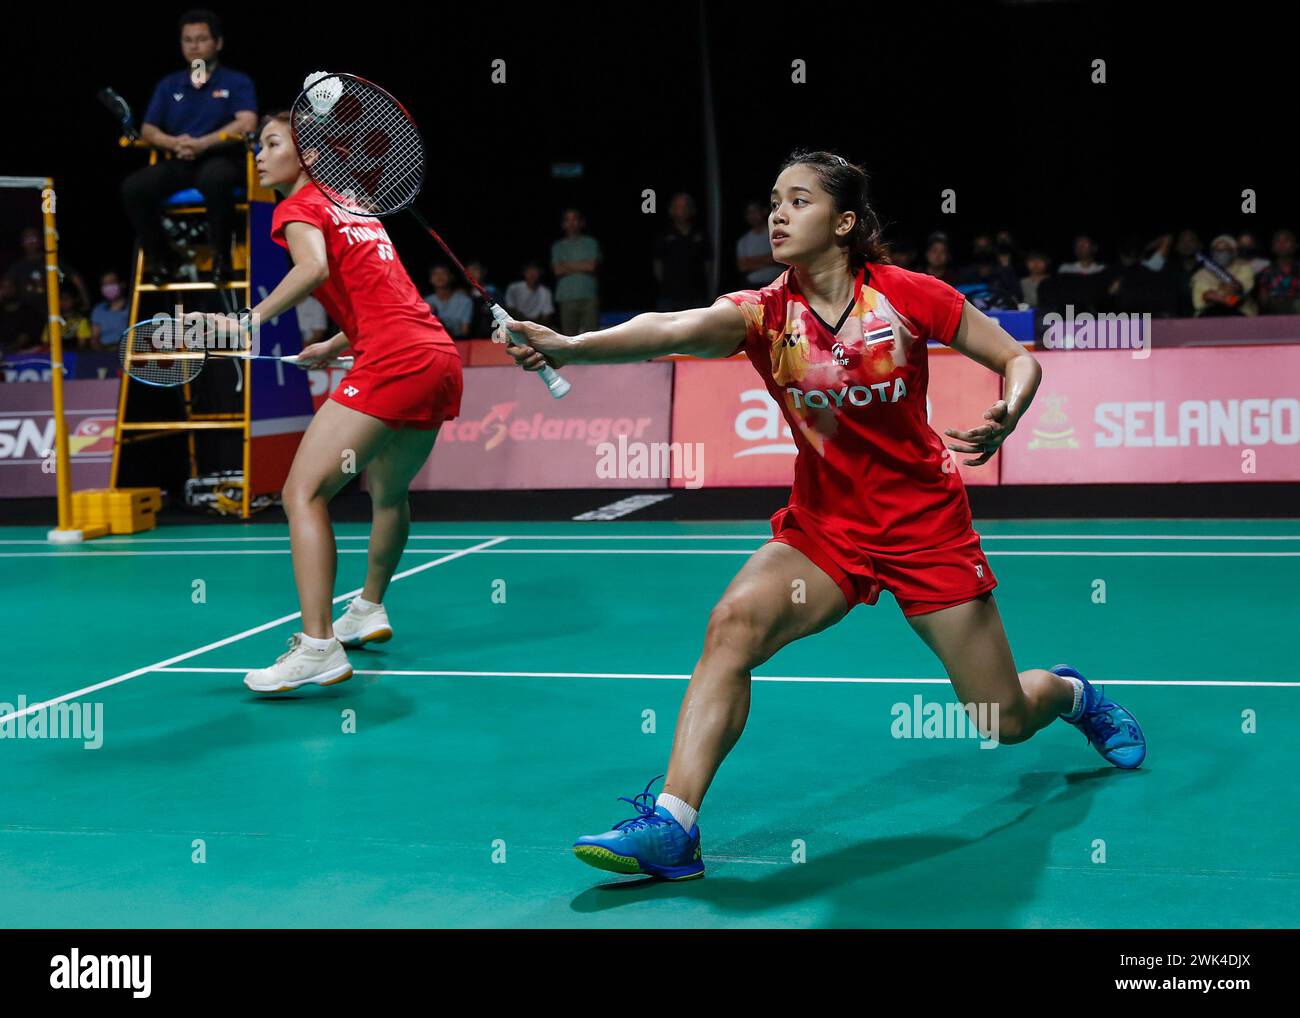 Kuala Lumpur, Malaysia. 18th Feb, 2024. Jongkolphan Kititharakul (L) and Rawinda Projongjai of Thailand seen in action against Gayatri Gopichand Pullela and Treesa Jolly of India (not pictured) during the Women's Doubles final match at the Badminton Asia Team Championships 2024 at Setia City Convention Centre in Shah Alam. Gayatri Gopichand Pullela and Treesa Jolly won with scores; 21/18/21 : 16/21/16. Credit: SOPA Images Limited/Alamy Live News Stock Photo